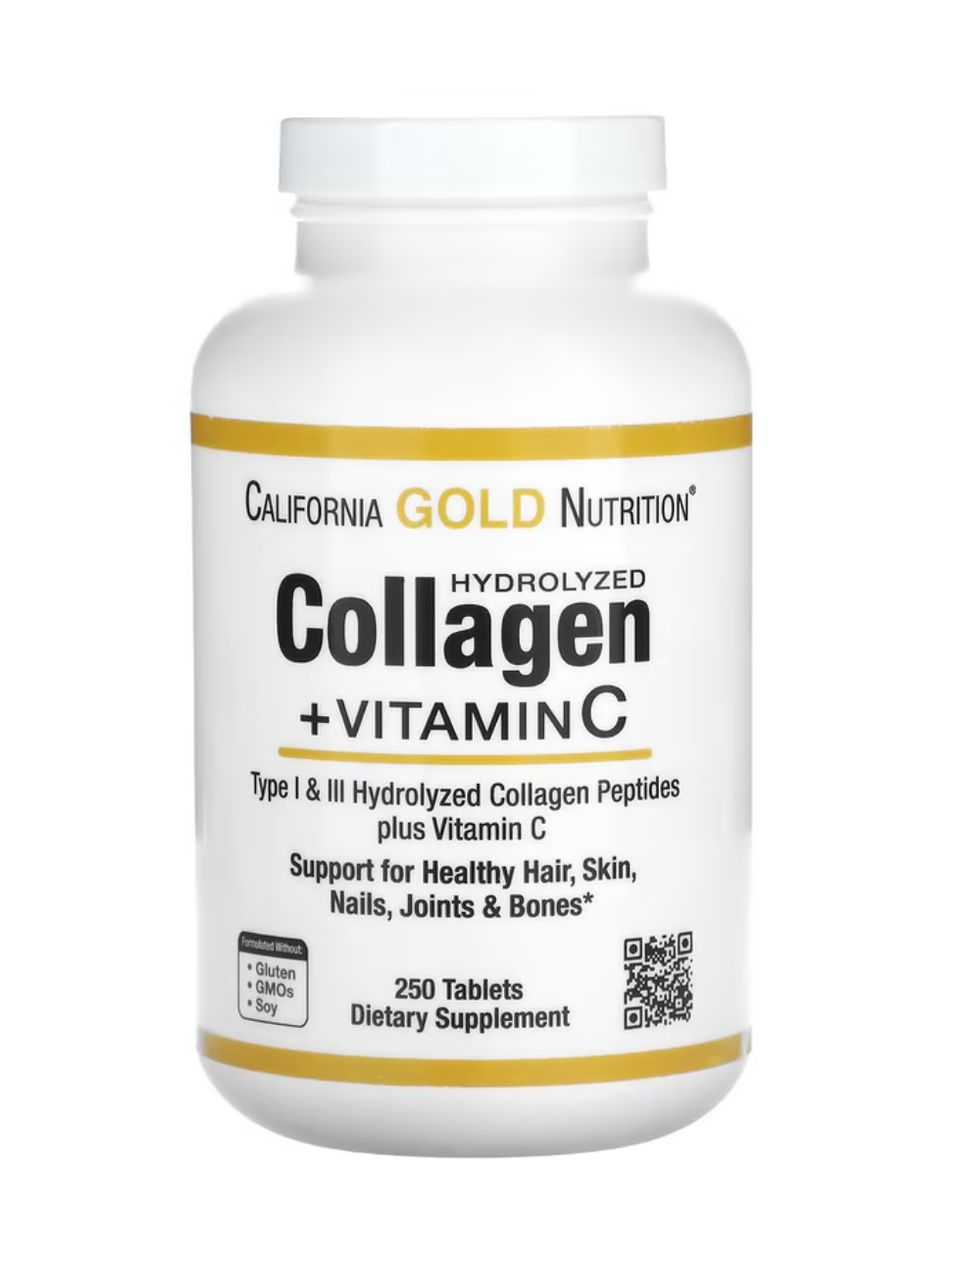 California Gold Hydrolyzed Collagen Peptides + Vitamin C Type I & III 250 Tablets